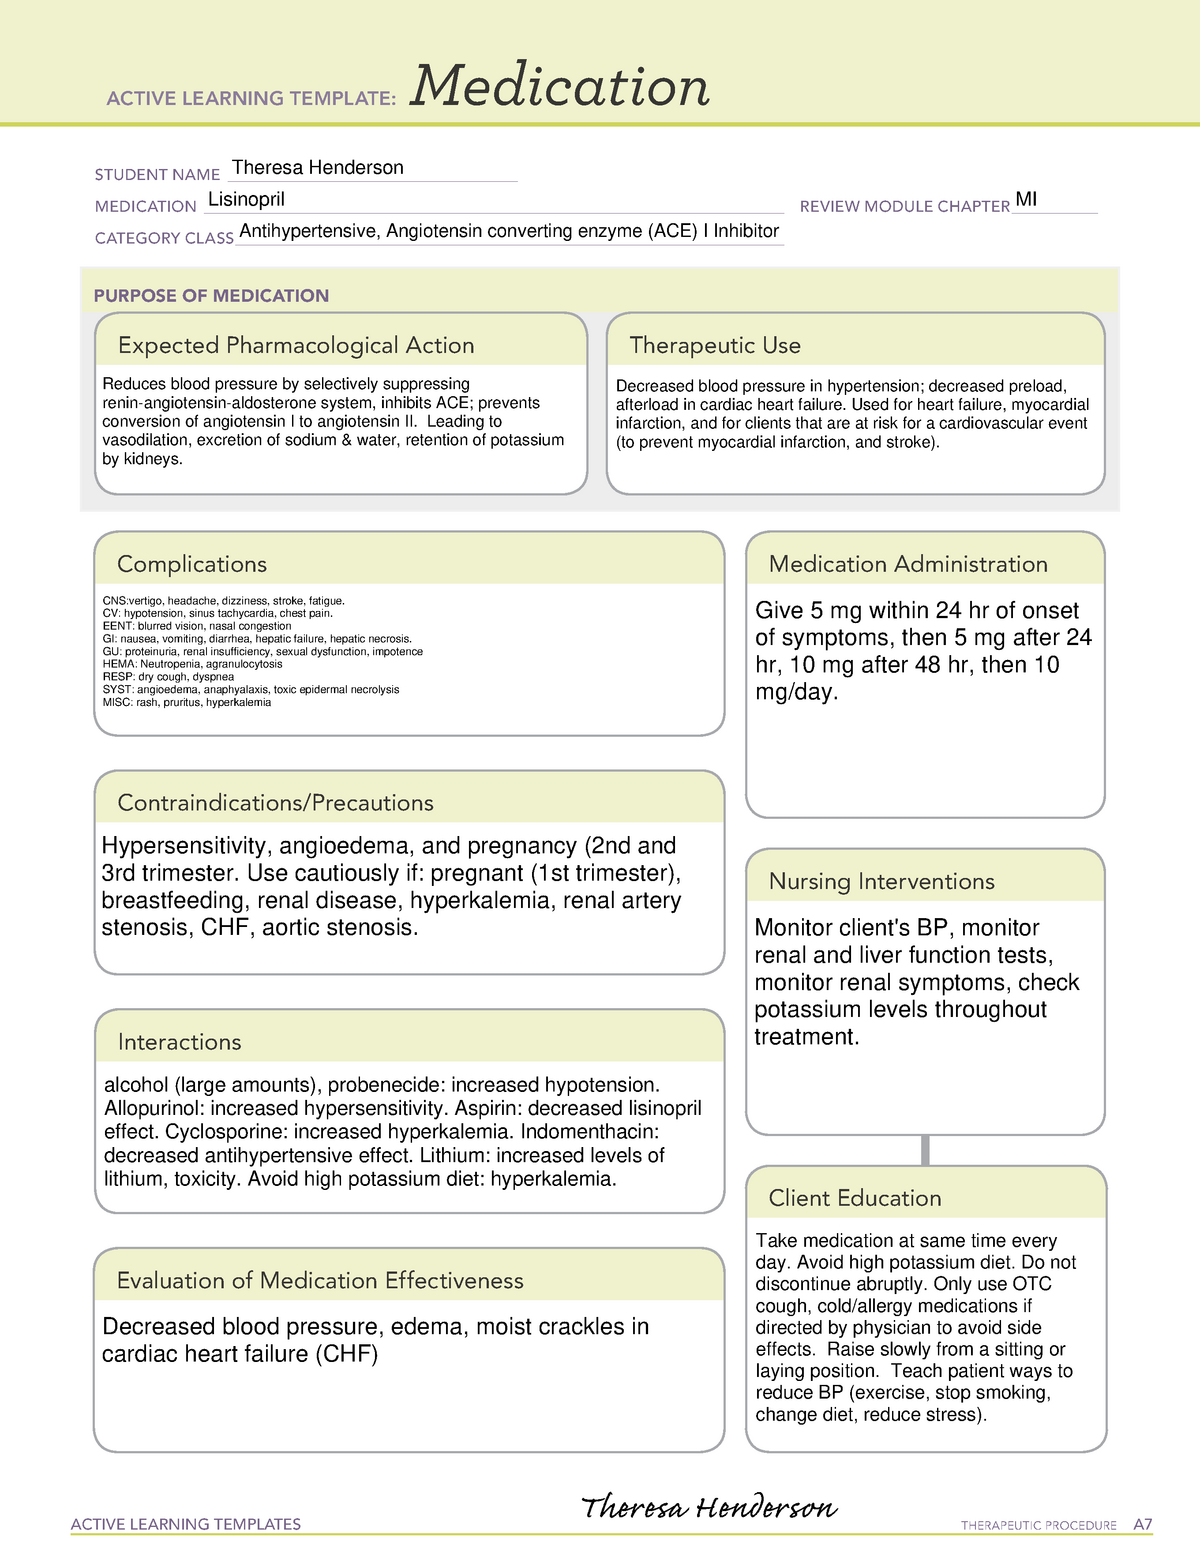 Active Learning Template medication Lisinoprilsigned ACTIVE